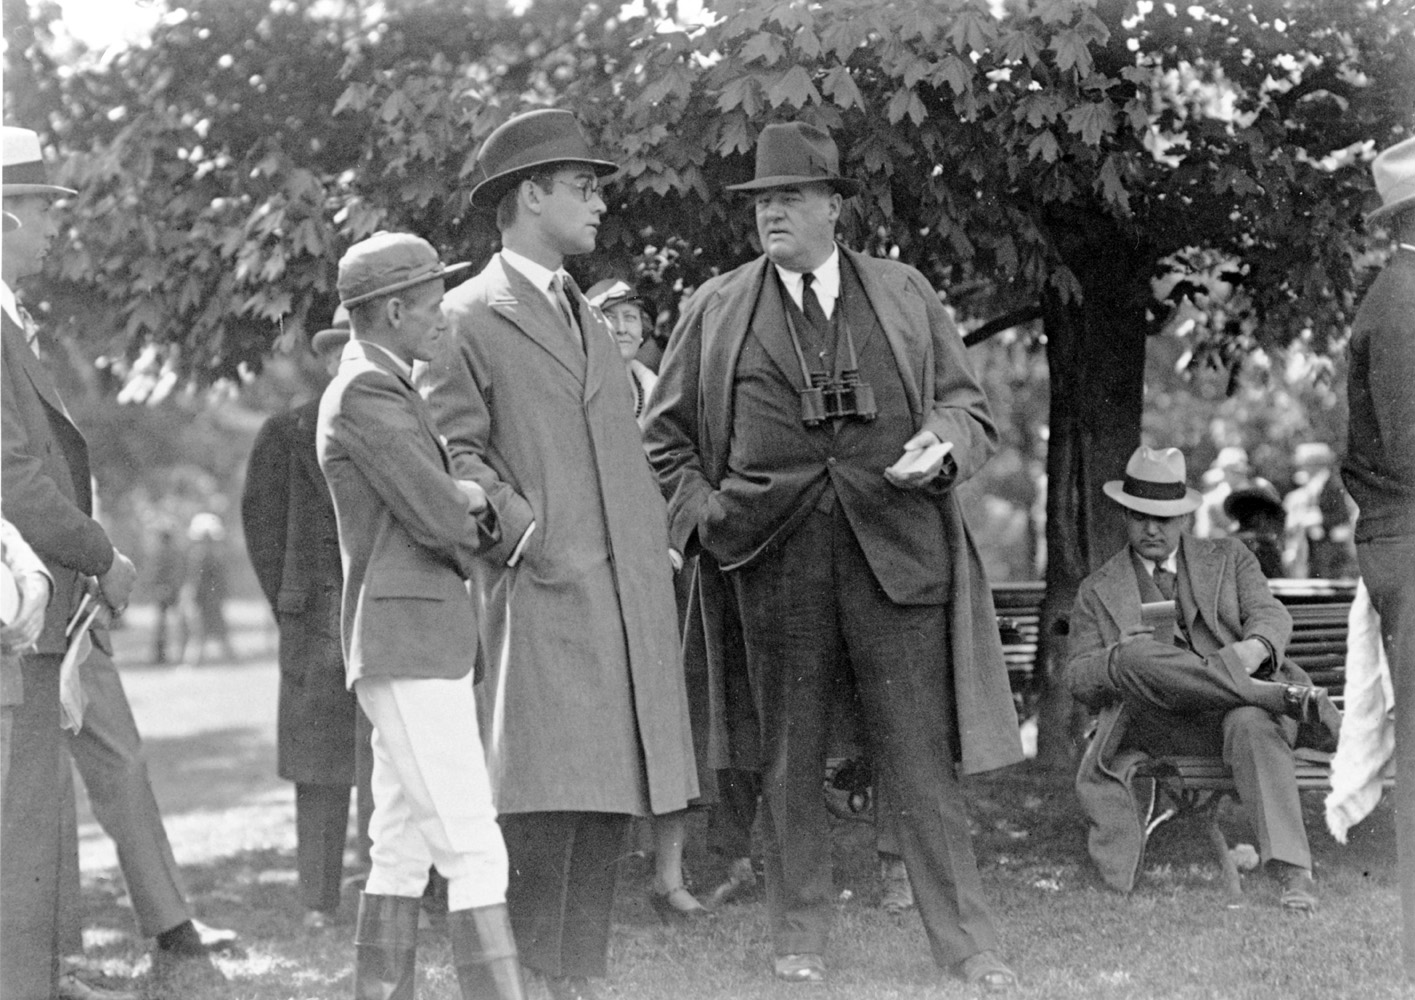 Buddy Ensor, John Hay Whitney, and J. W. Healey in the paddock (Keeneland Library Cook Collection/Museum Collection)